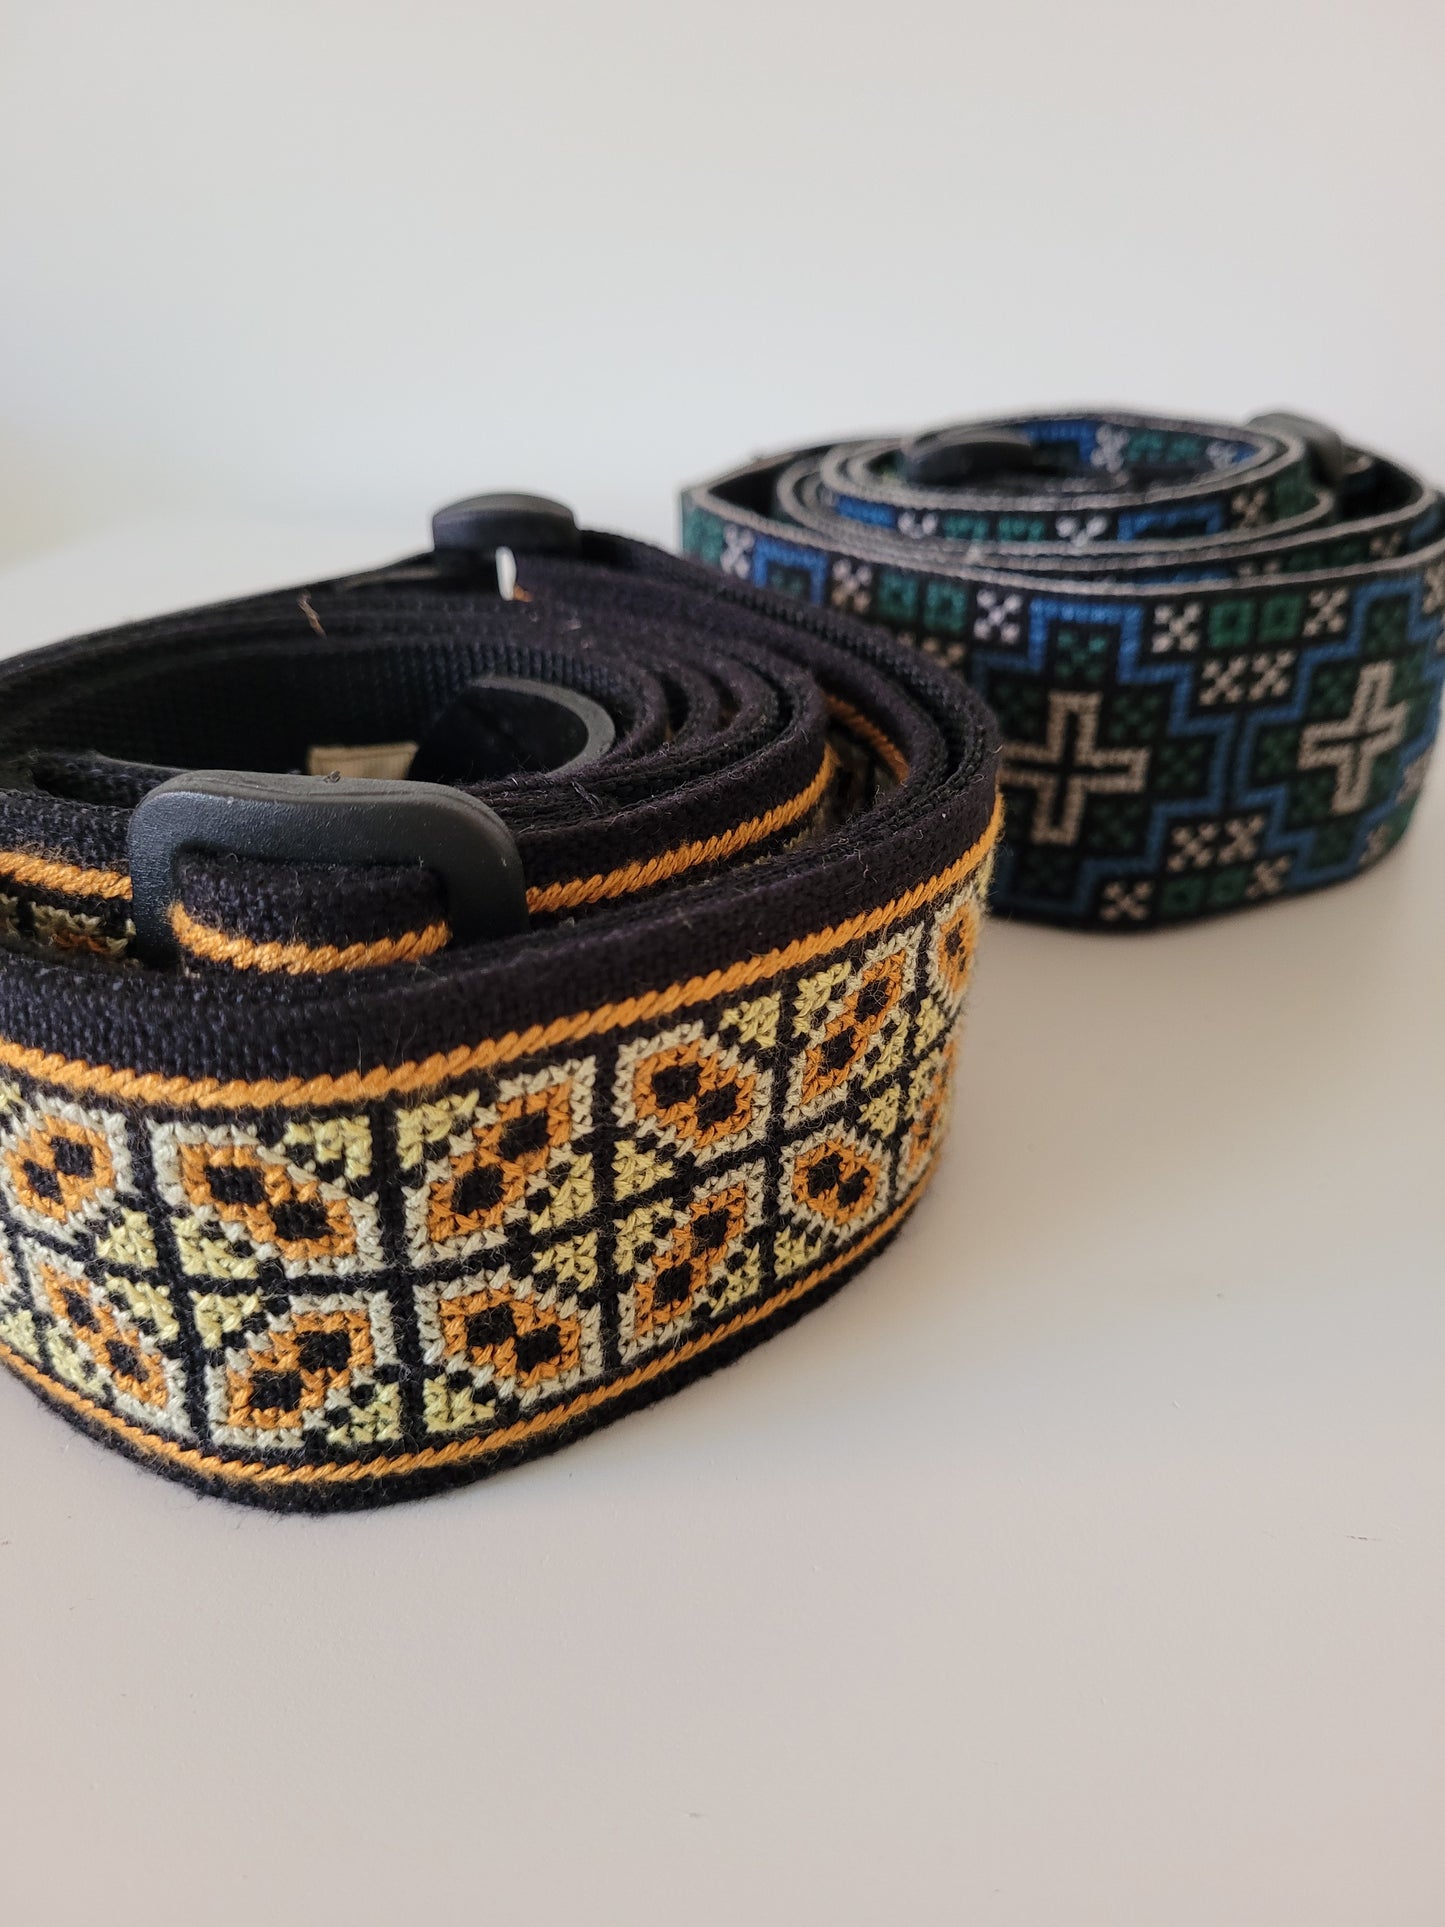 Hmong stitched Guitar Strap